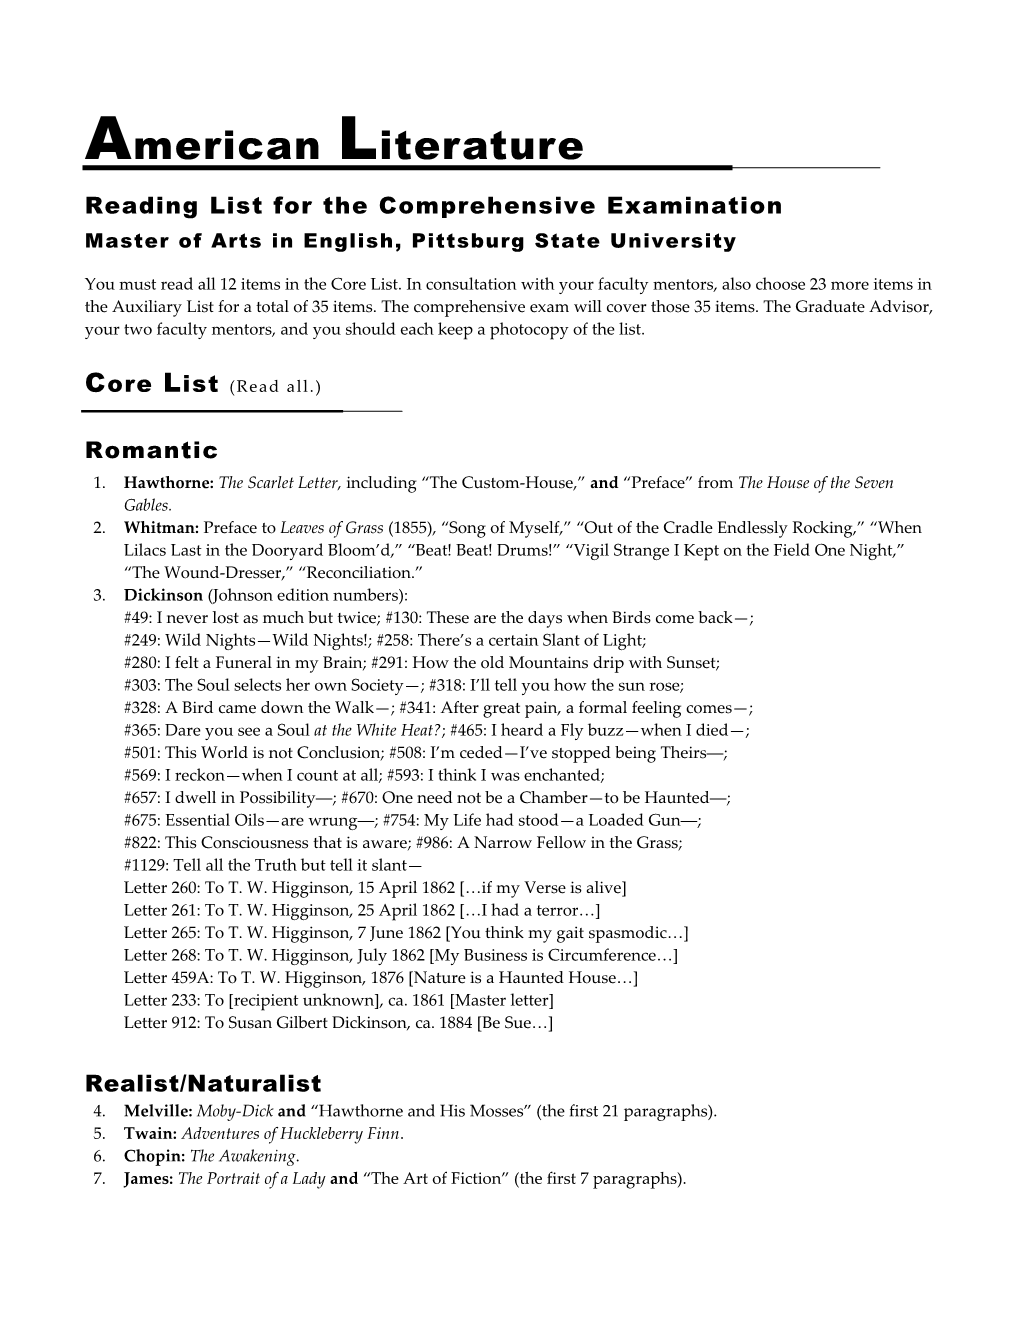 Reading List for the Comprehensive Examination